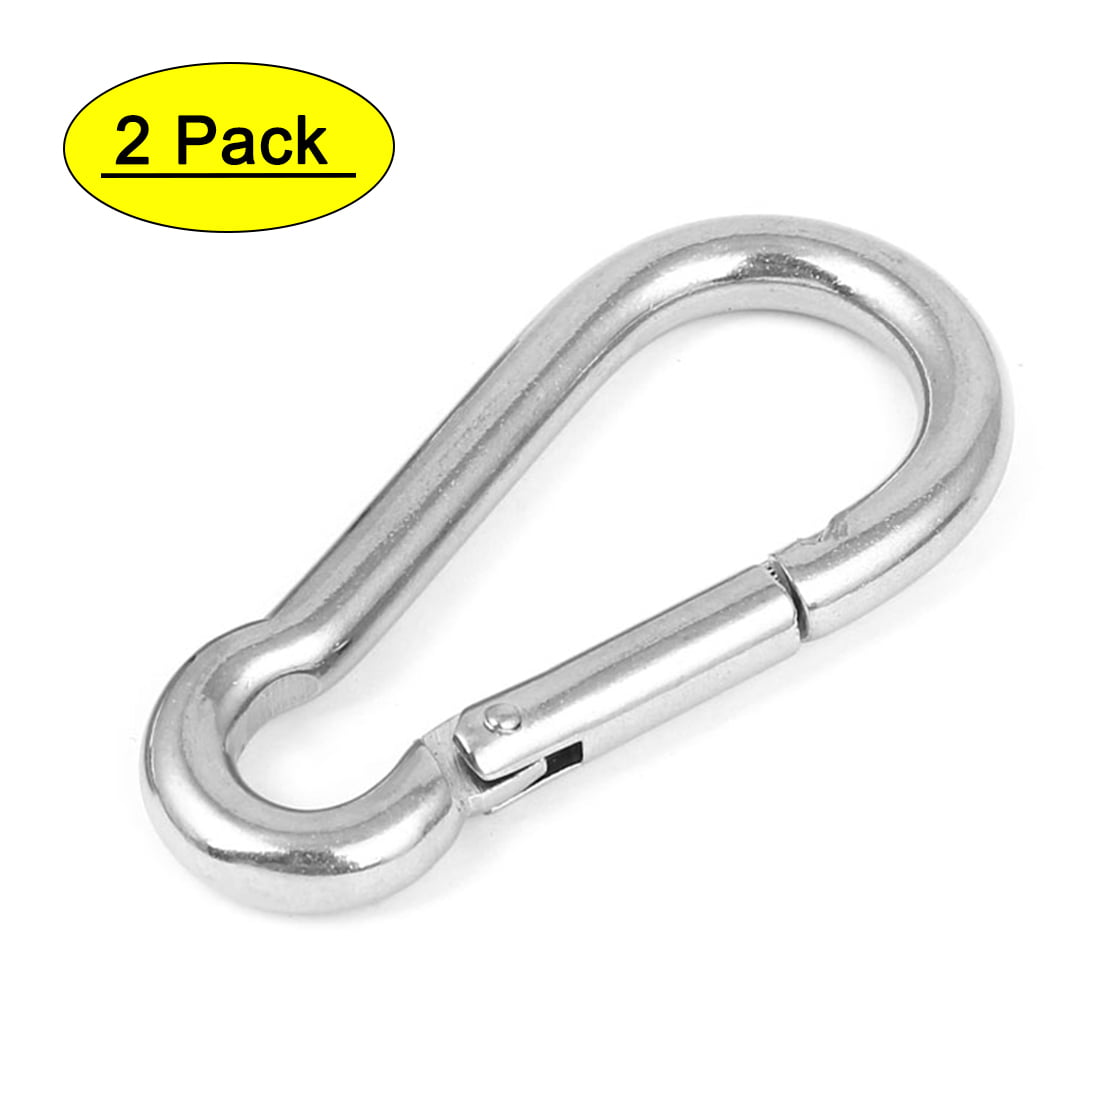 6mm STAINLESS STEEL 316 SNAP HOOK SAFETY CLIP CARABINER CLIMBING LOCK 2pcs 